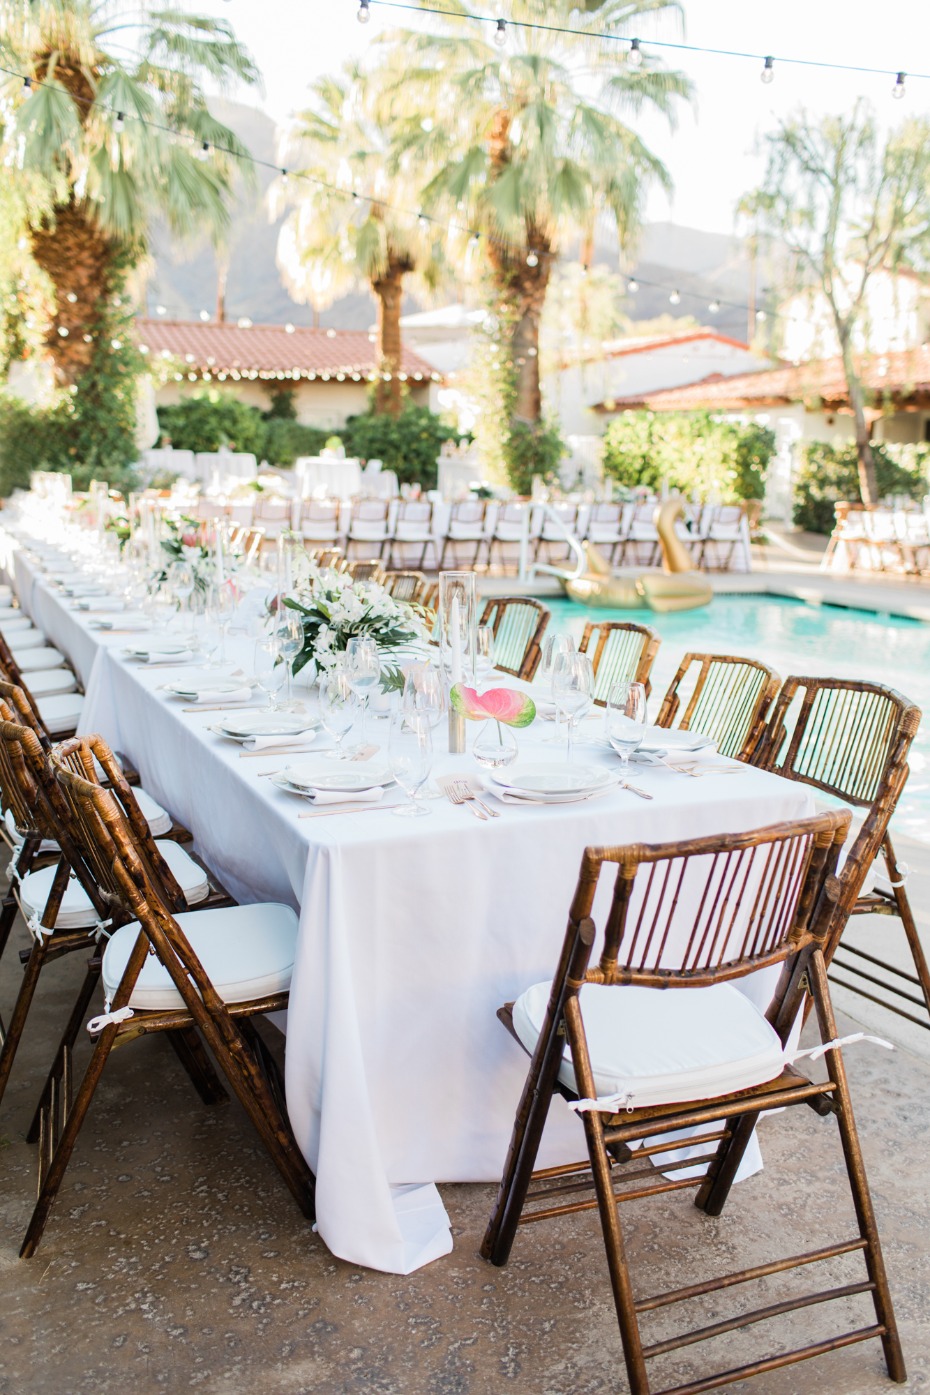 Palm Springs Weddings That Make Us Not Want to Leave